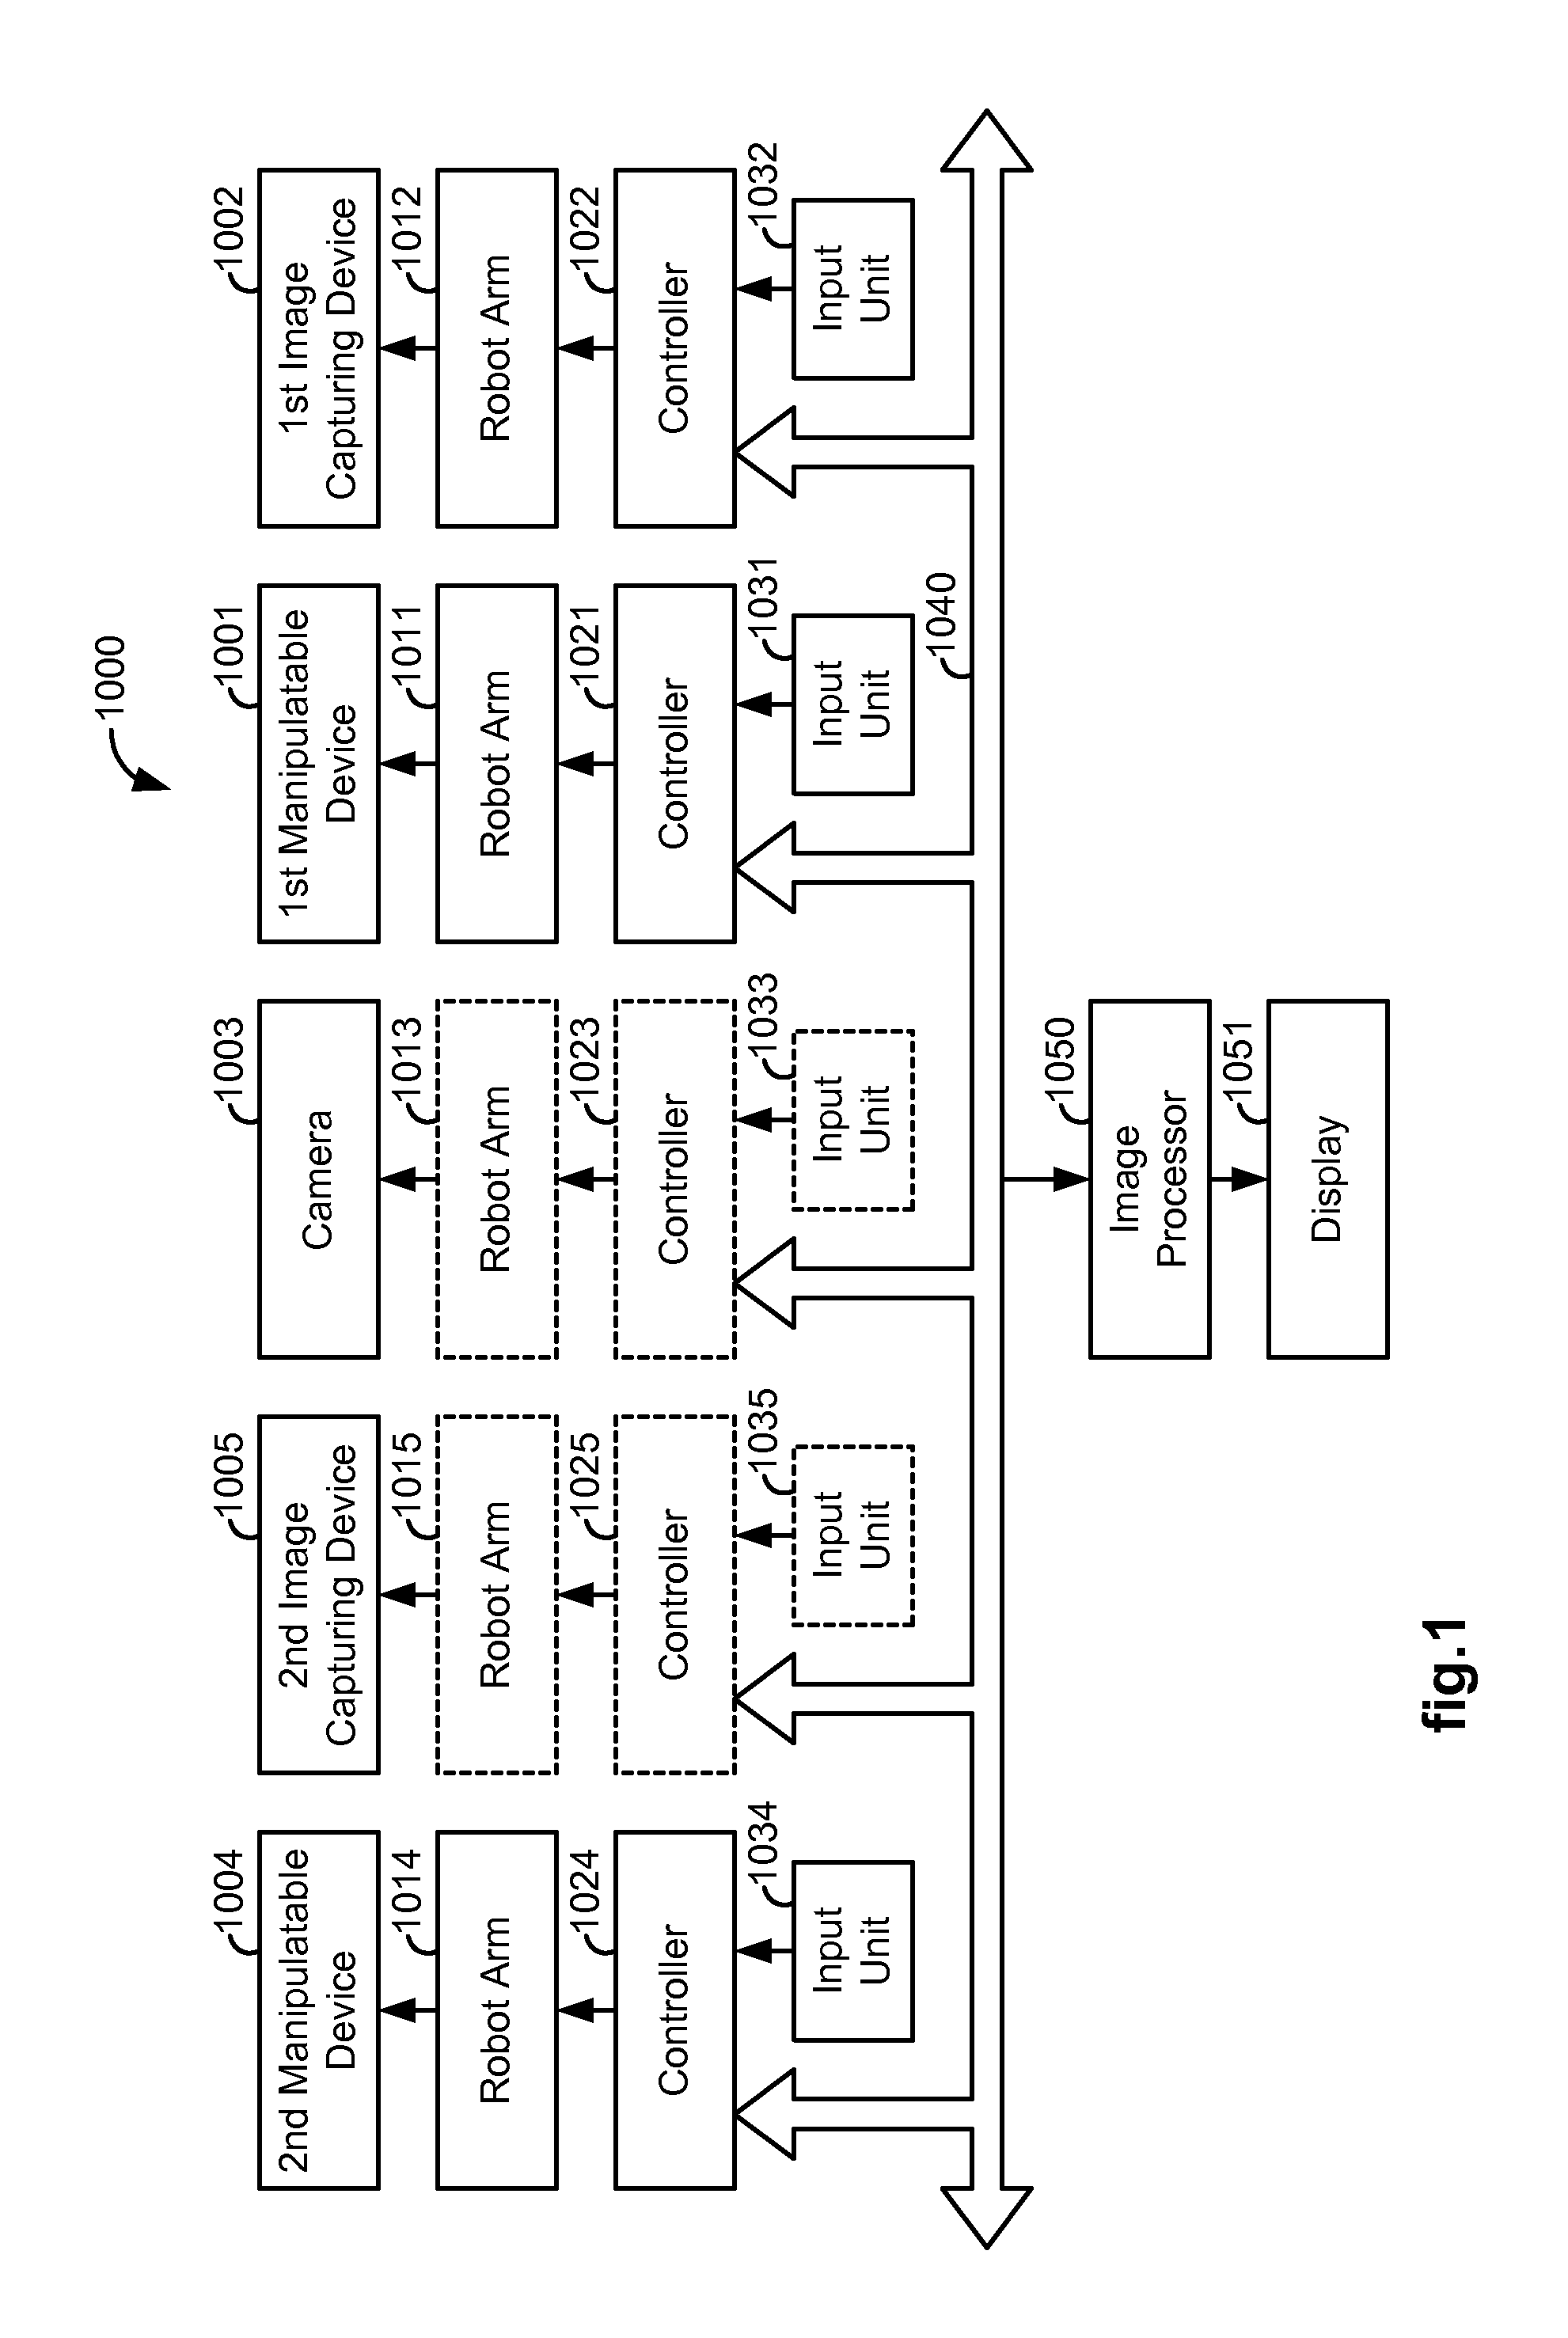 Collision avoidance during controlled movement of image capturing device and manipulatable device movable arms